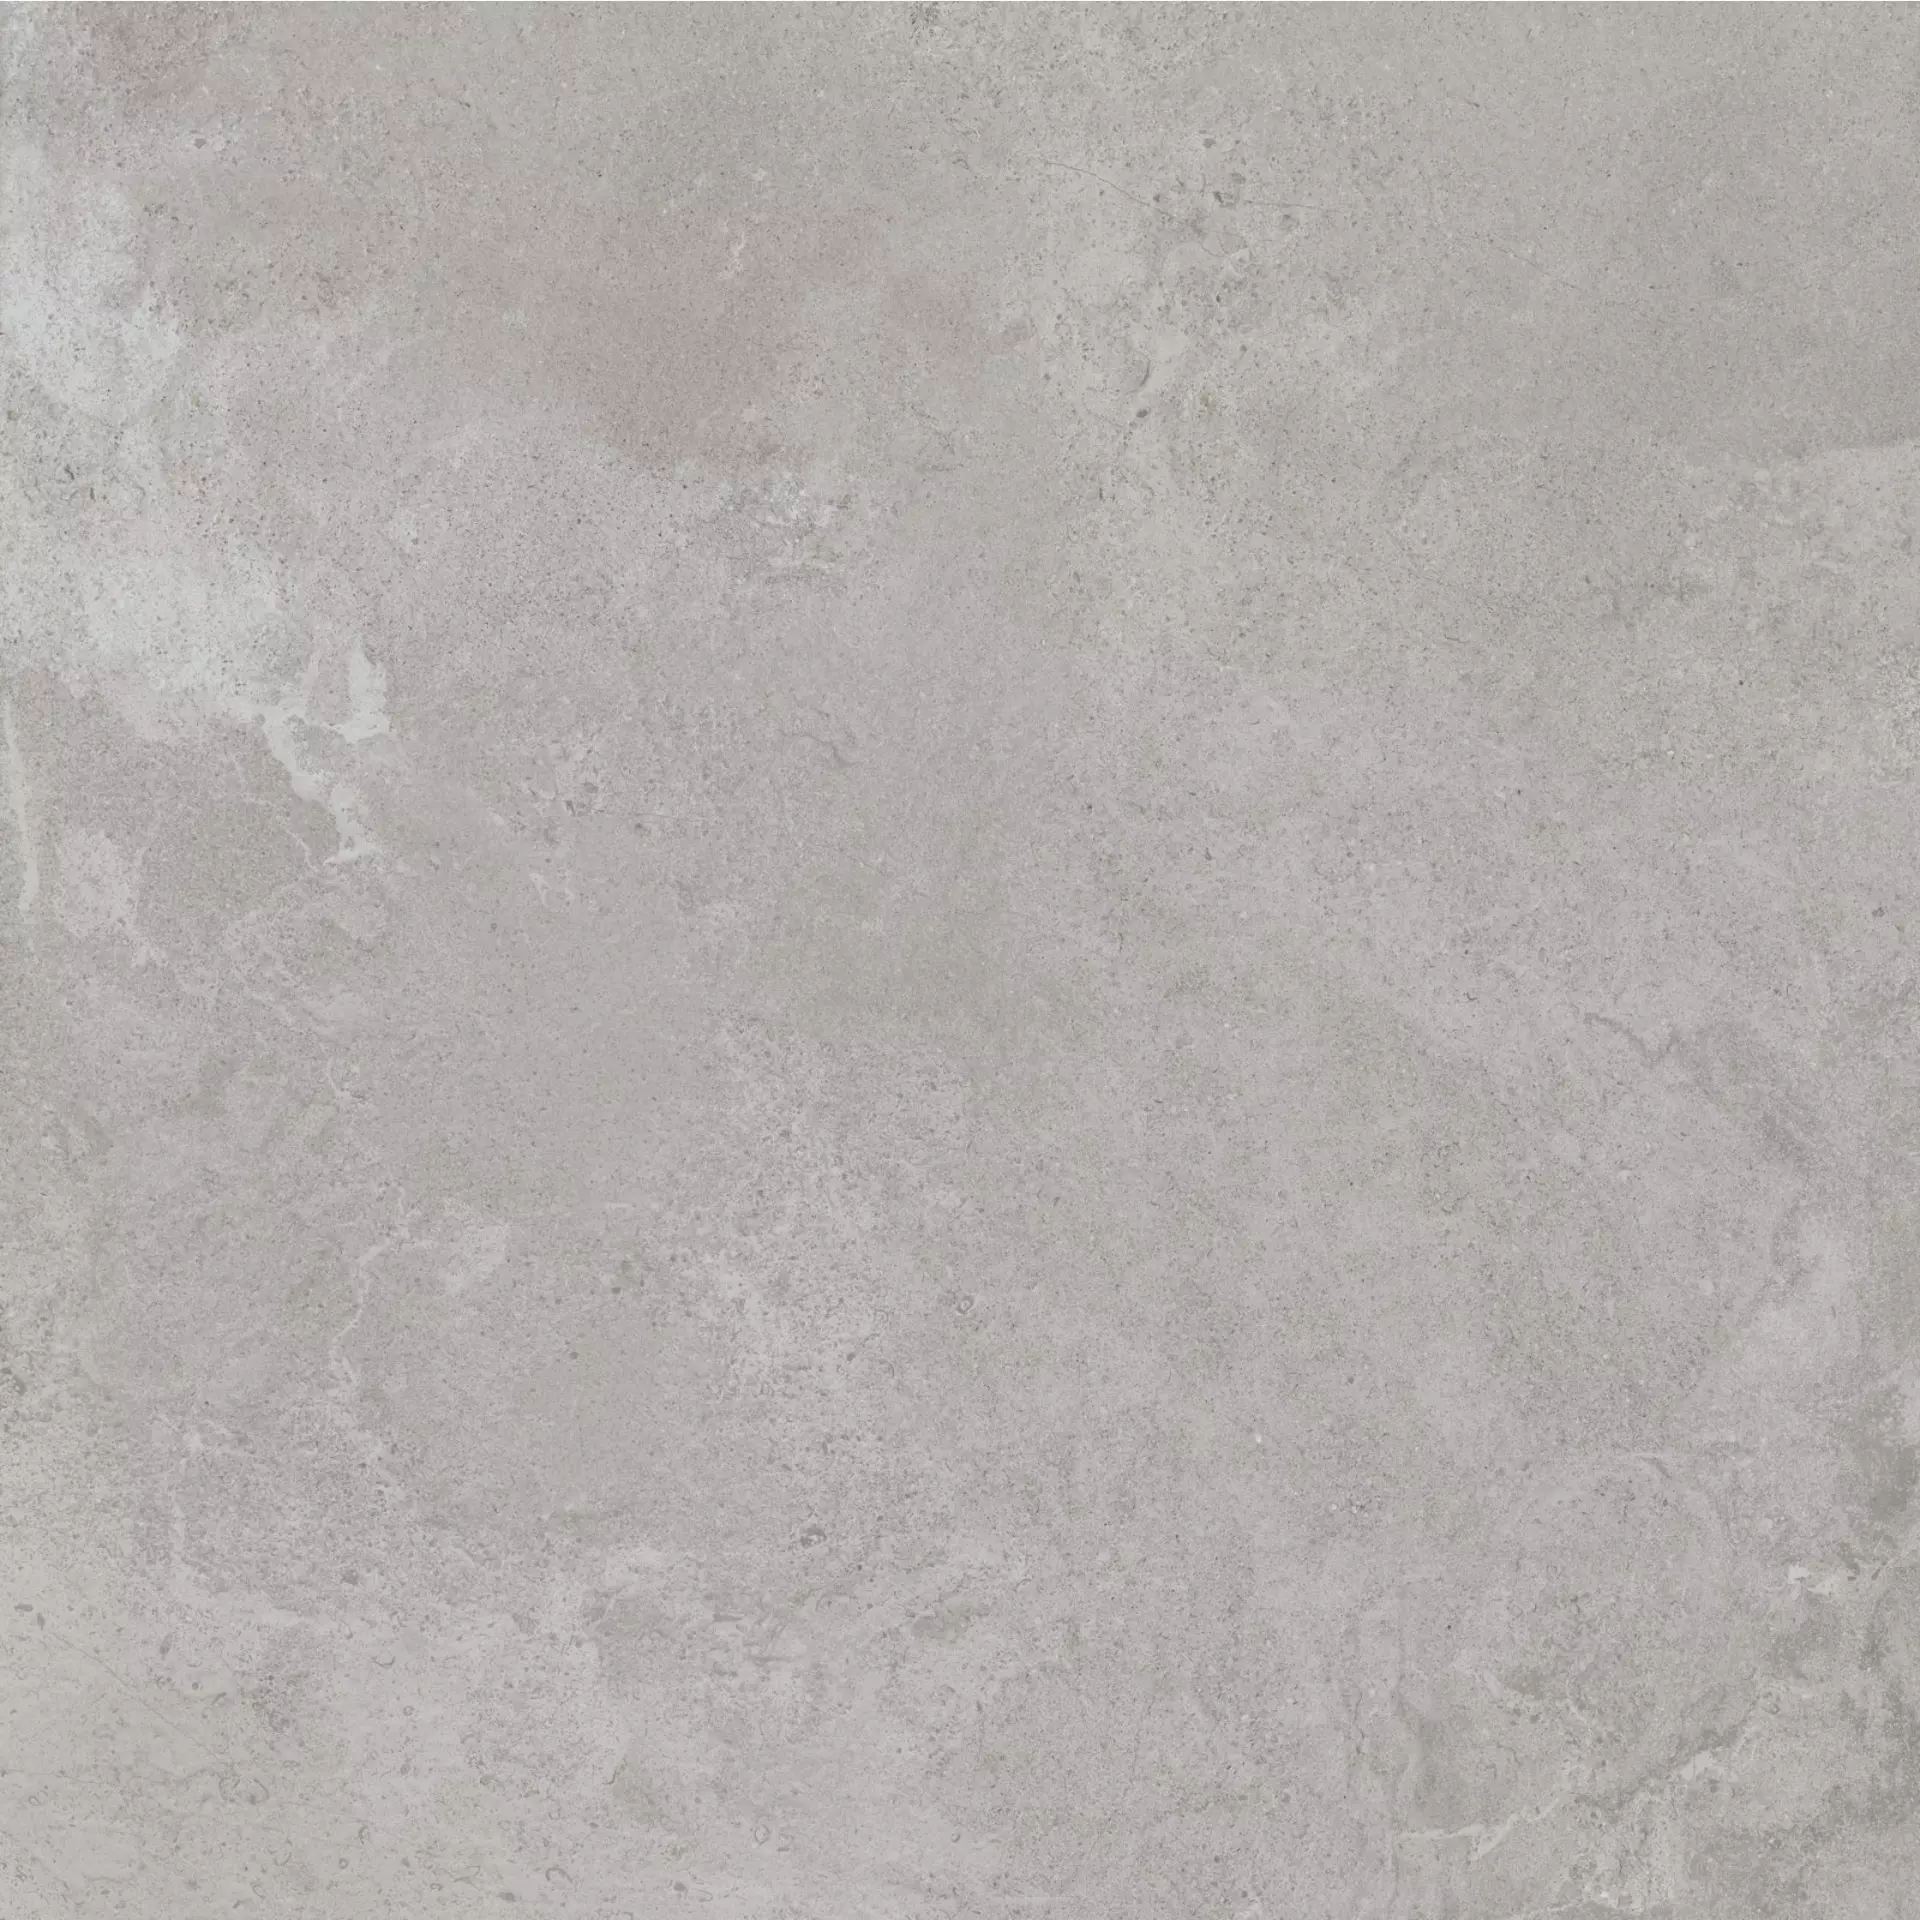 ABK Alpes Wide Grey Naturale PF60000216 120x120cm rectified 8,5mm